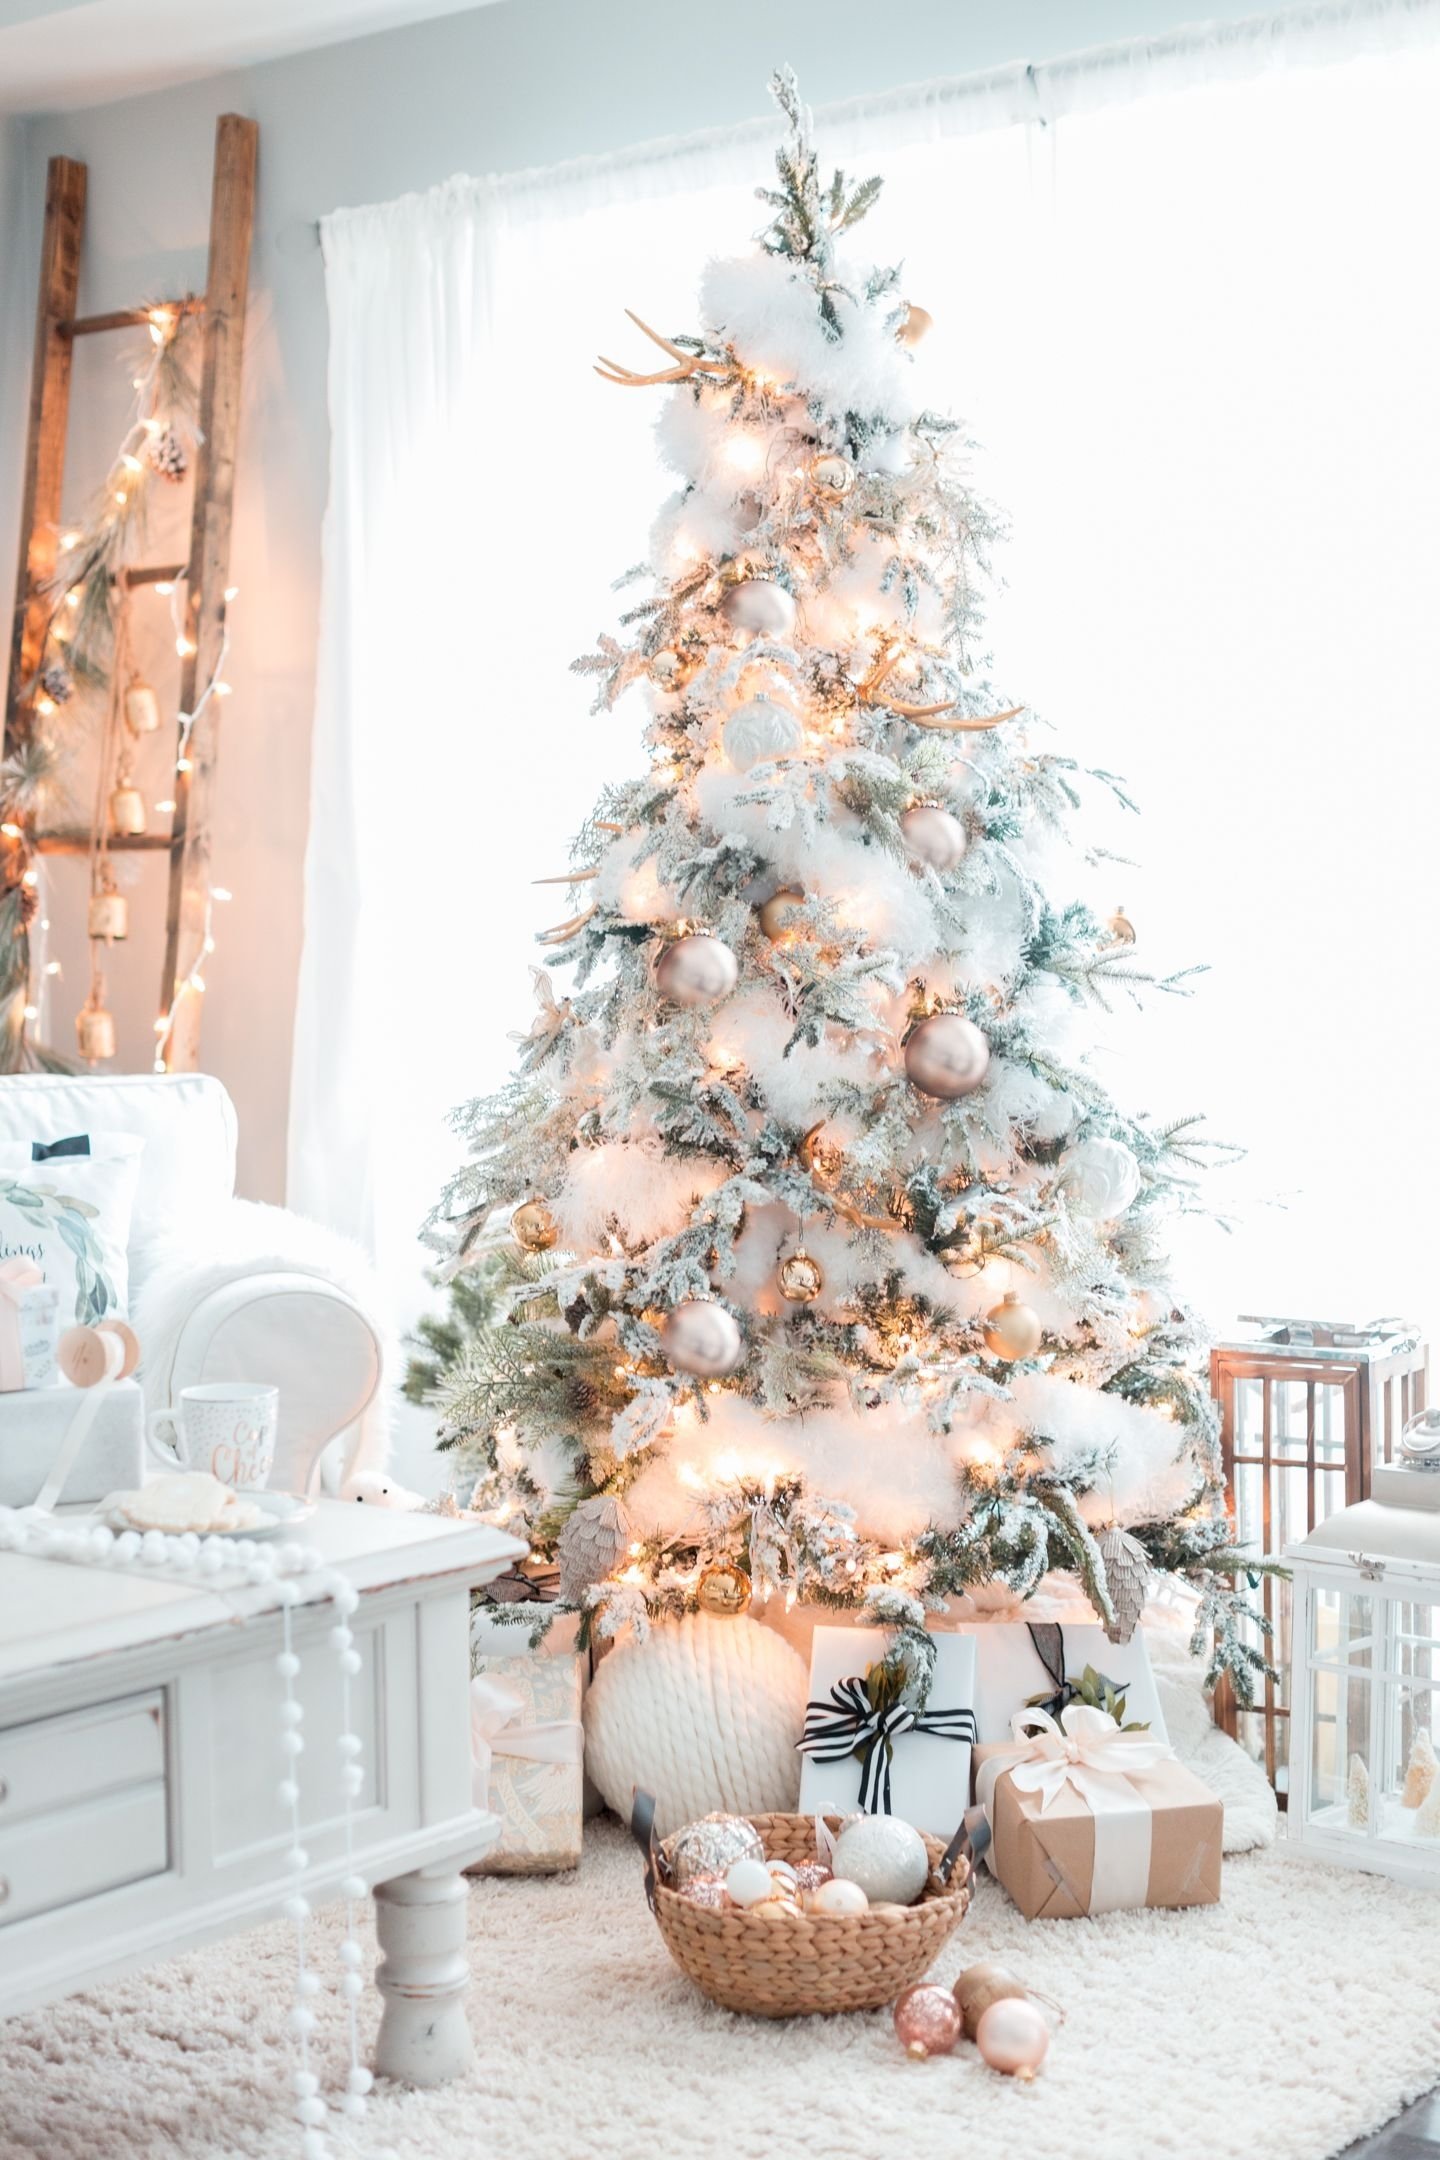 10 Attractive White Christmas Tree Decorating Ideas craftberry bush christmas home tour part 2 http www 2022